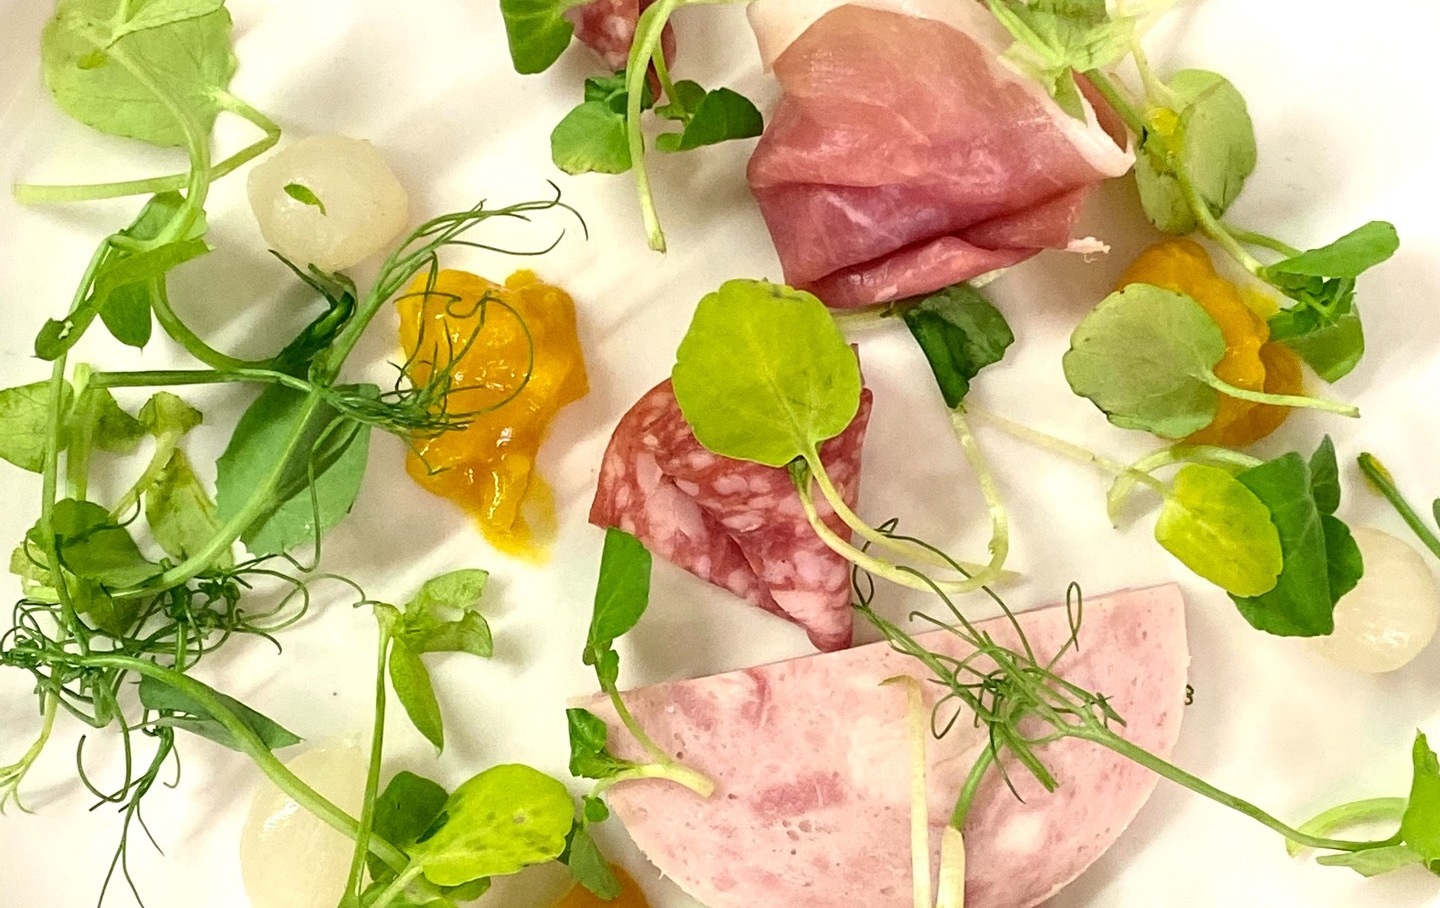 Pea shoot, salami and ham salad with piccalilli dressing